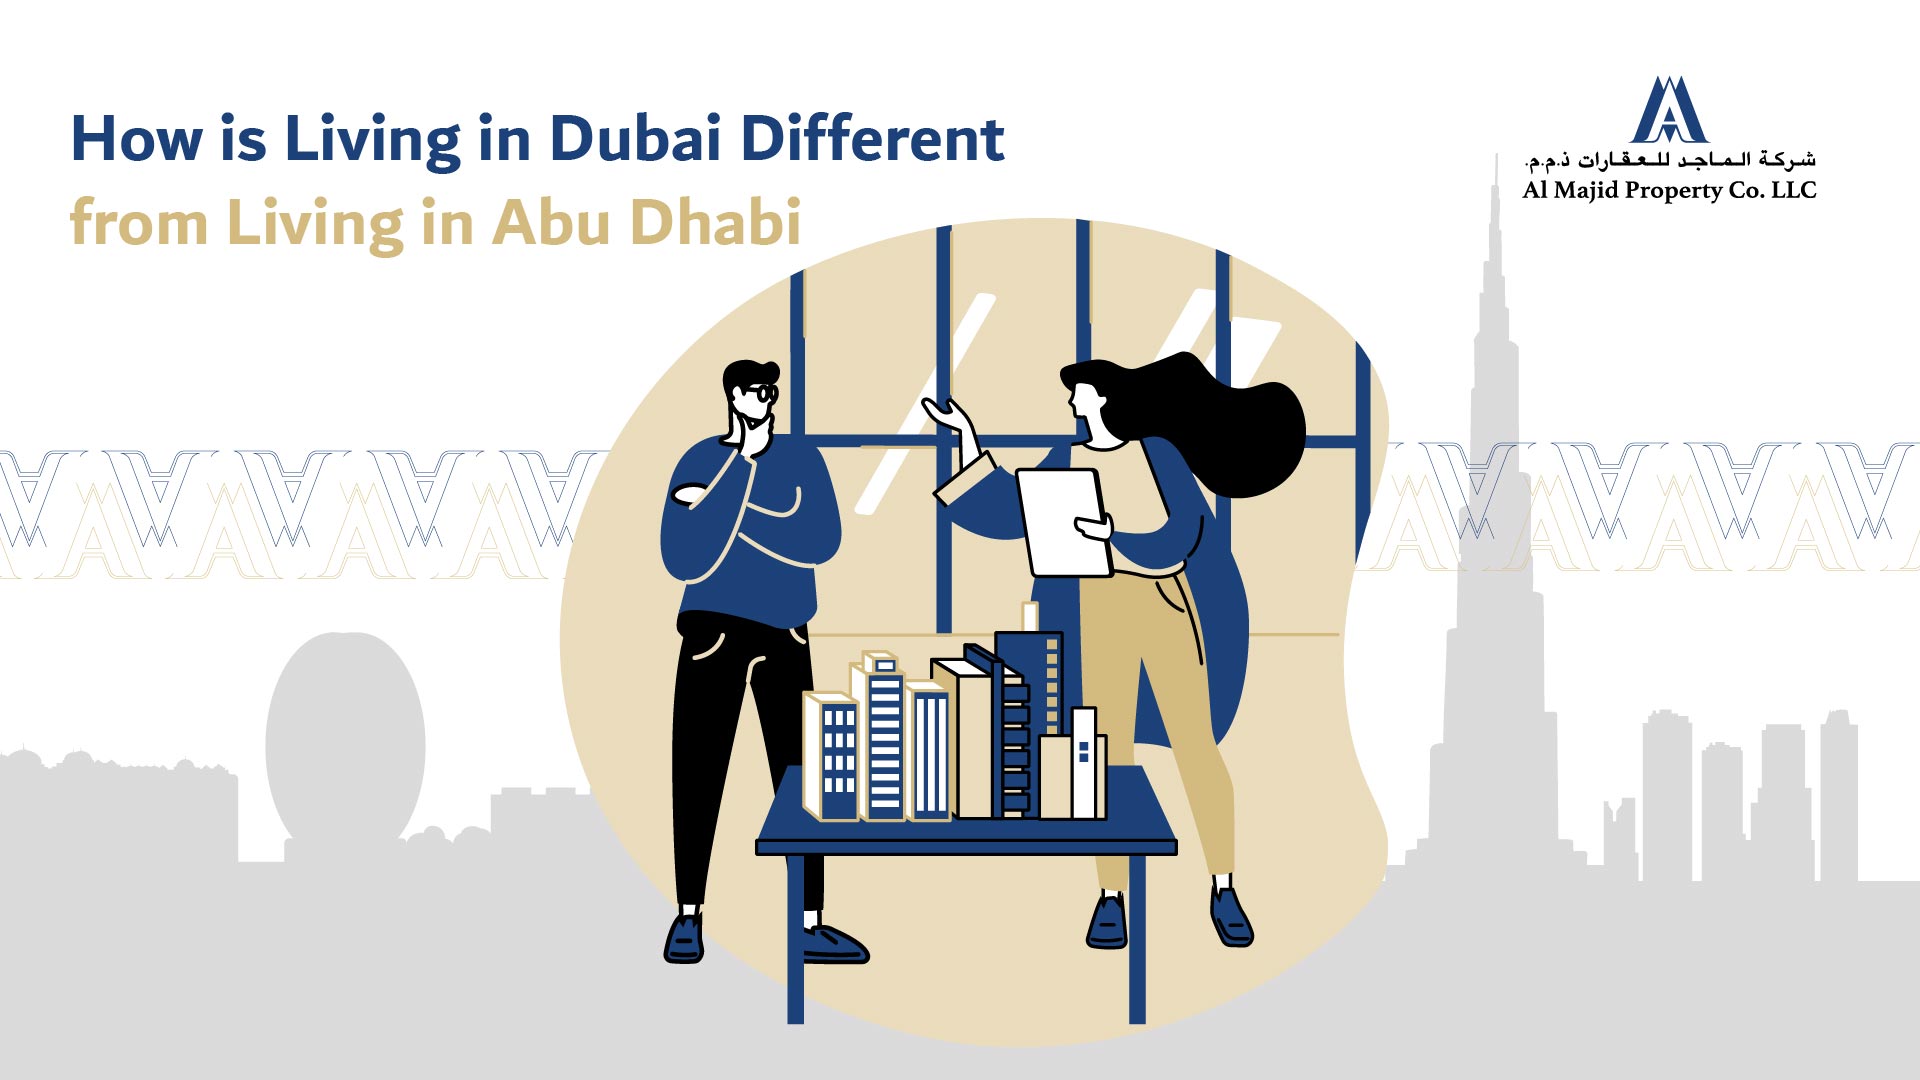 How is Living in Dubai Different from Living in Abu Dhabi